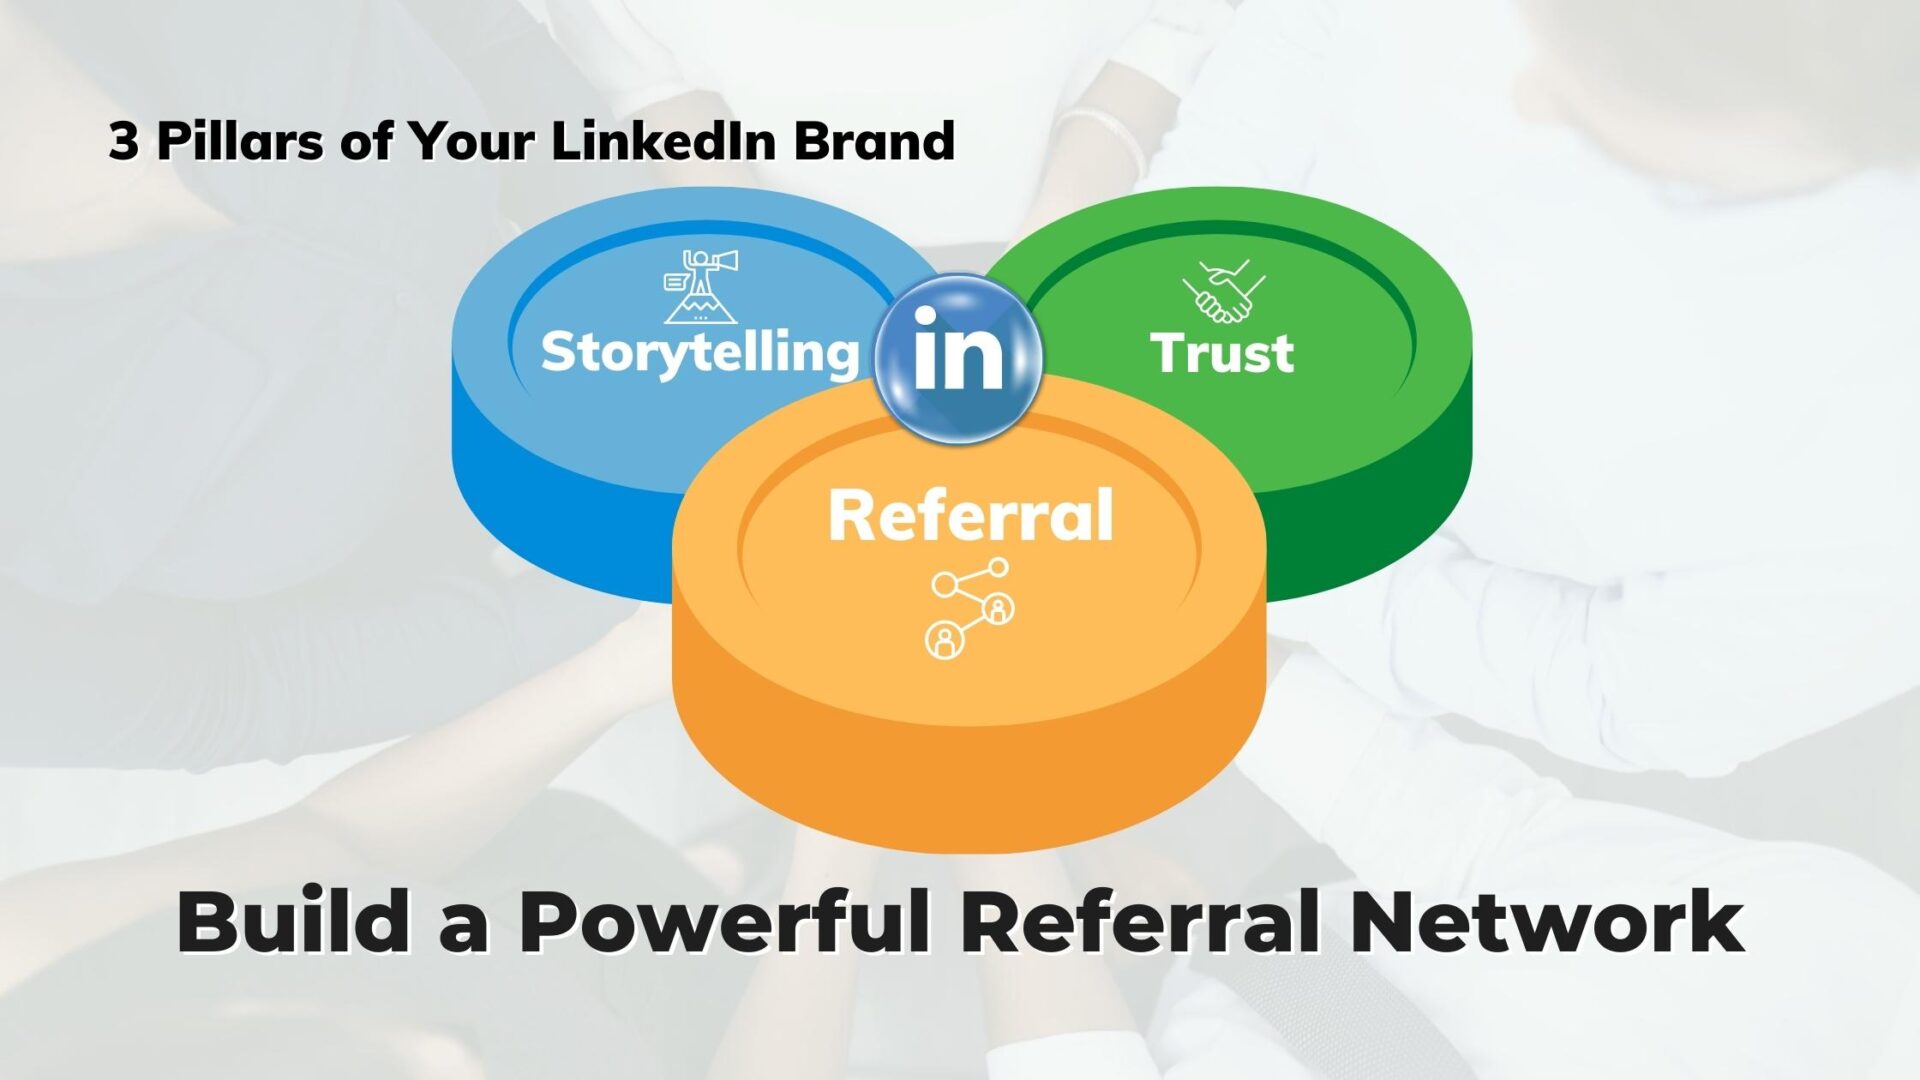 How Savvy Leaders Use LinkedIn to Build a Powerful Referral Network